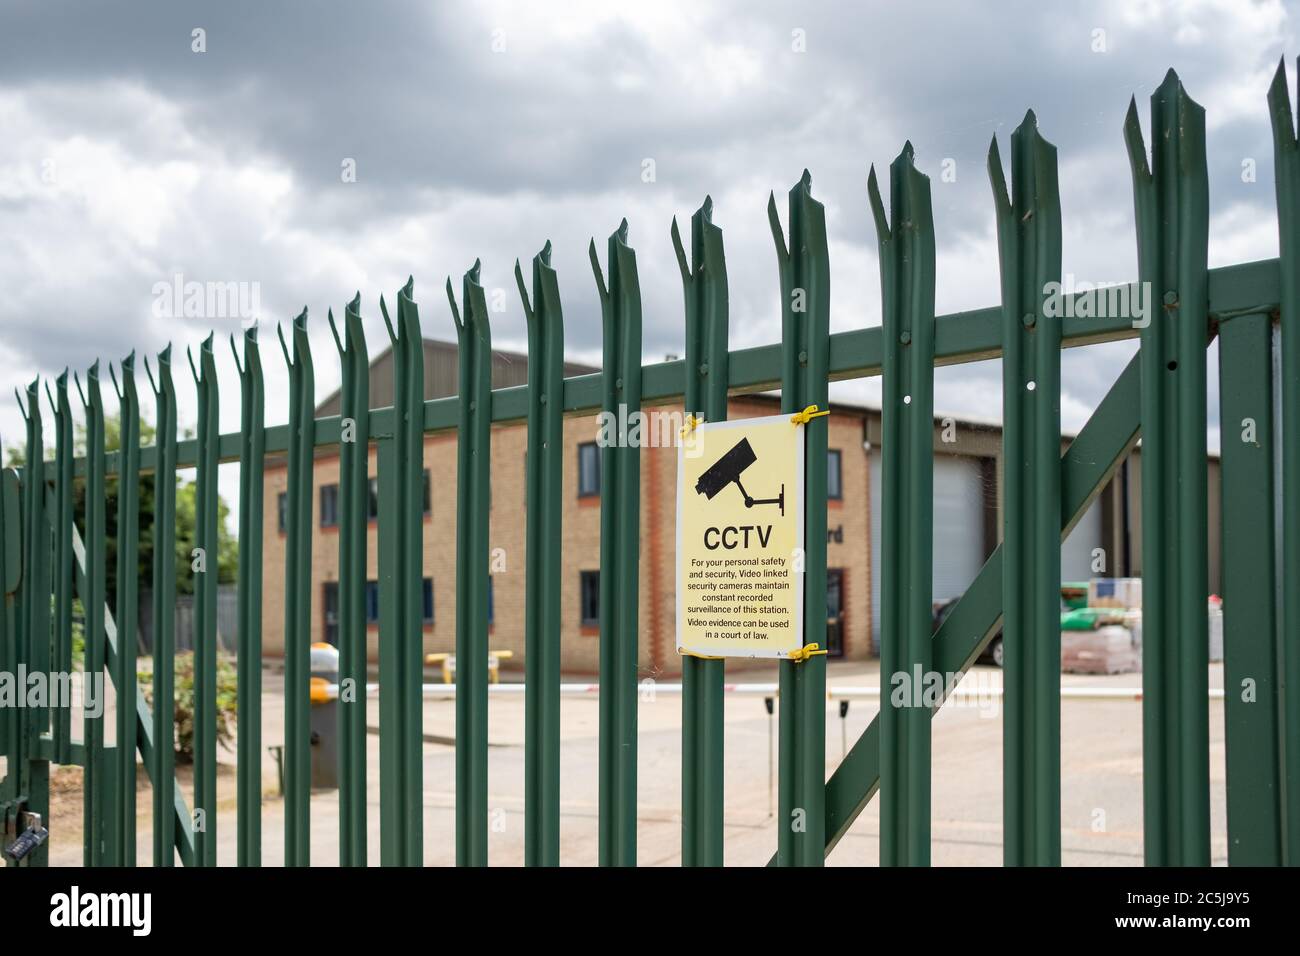 Shallow focus of a CCTV security sign seen on a metal, secure industrial fence. Beyond the fence is a large warehouse and office buildings. Stock Photo